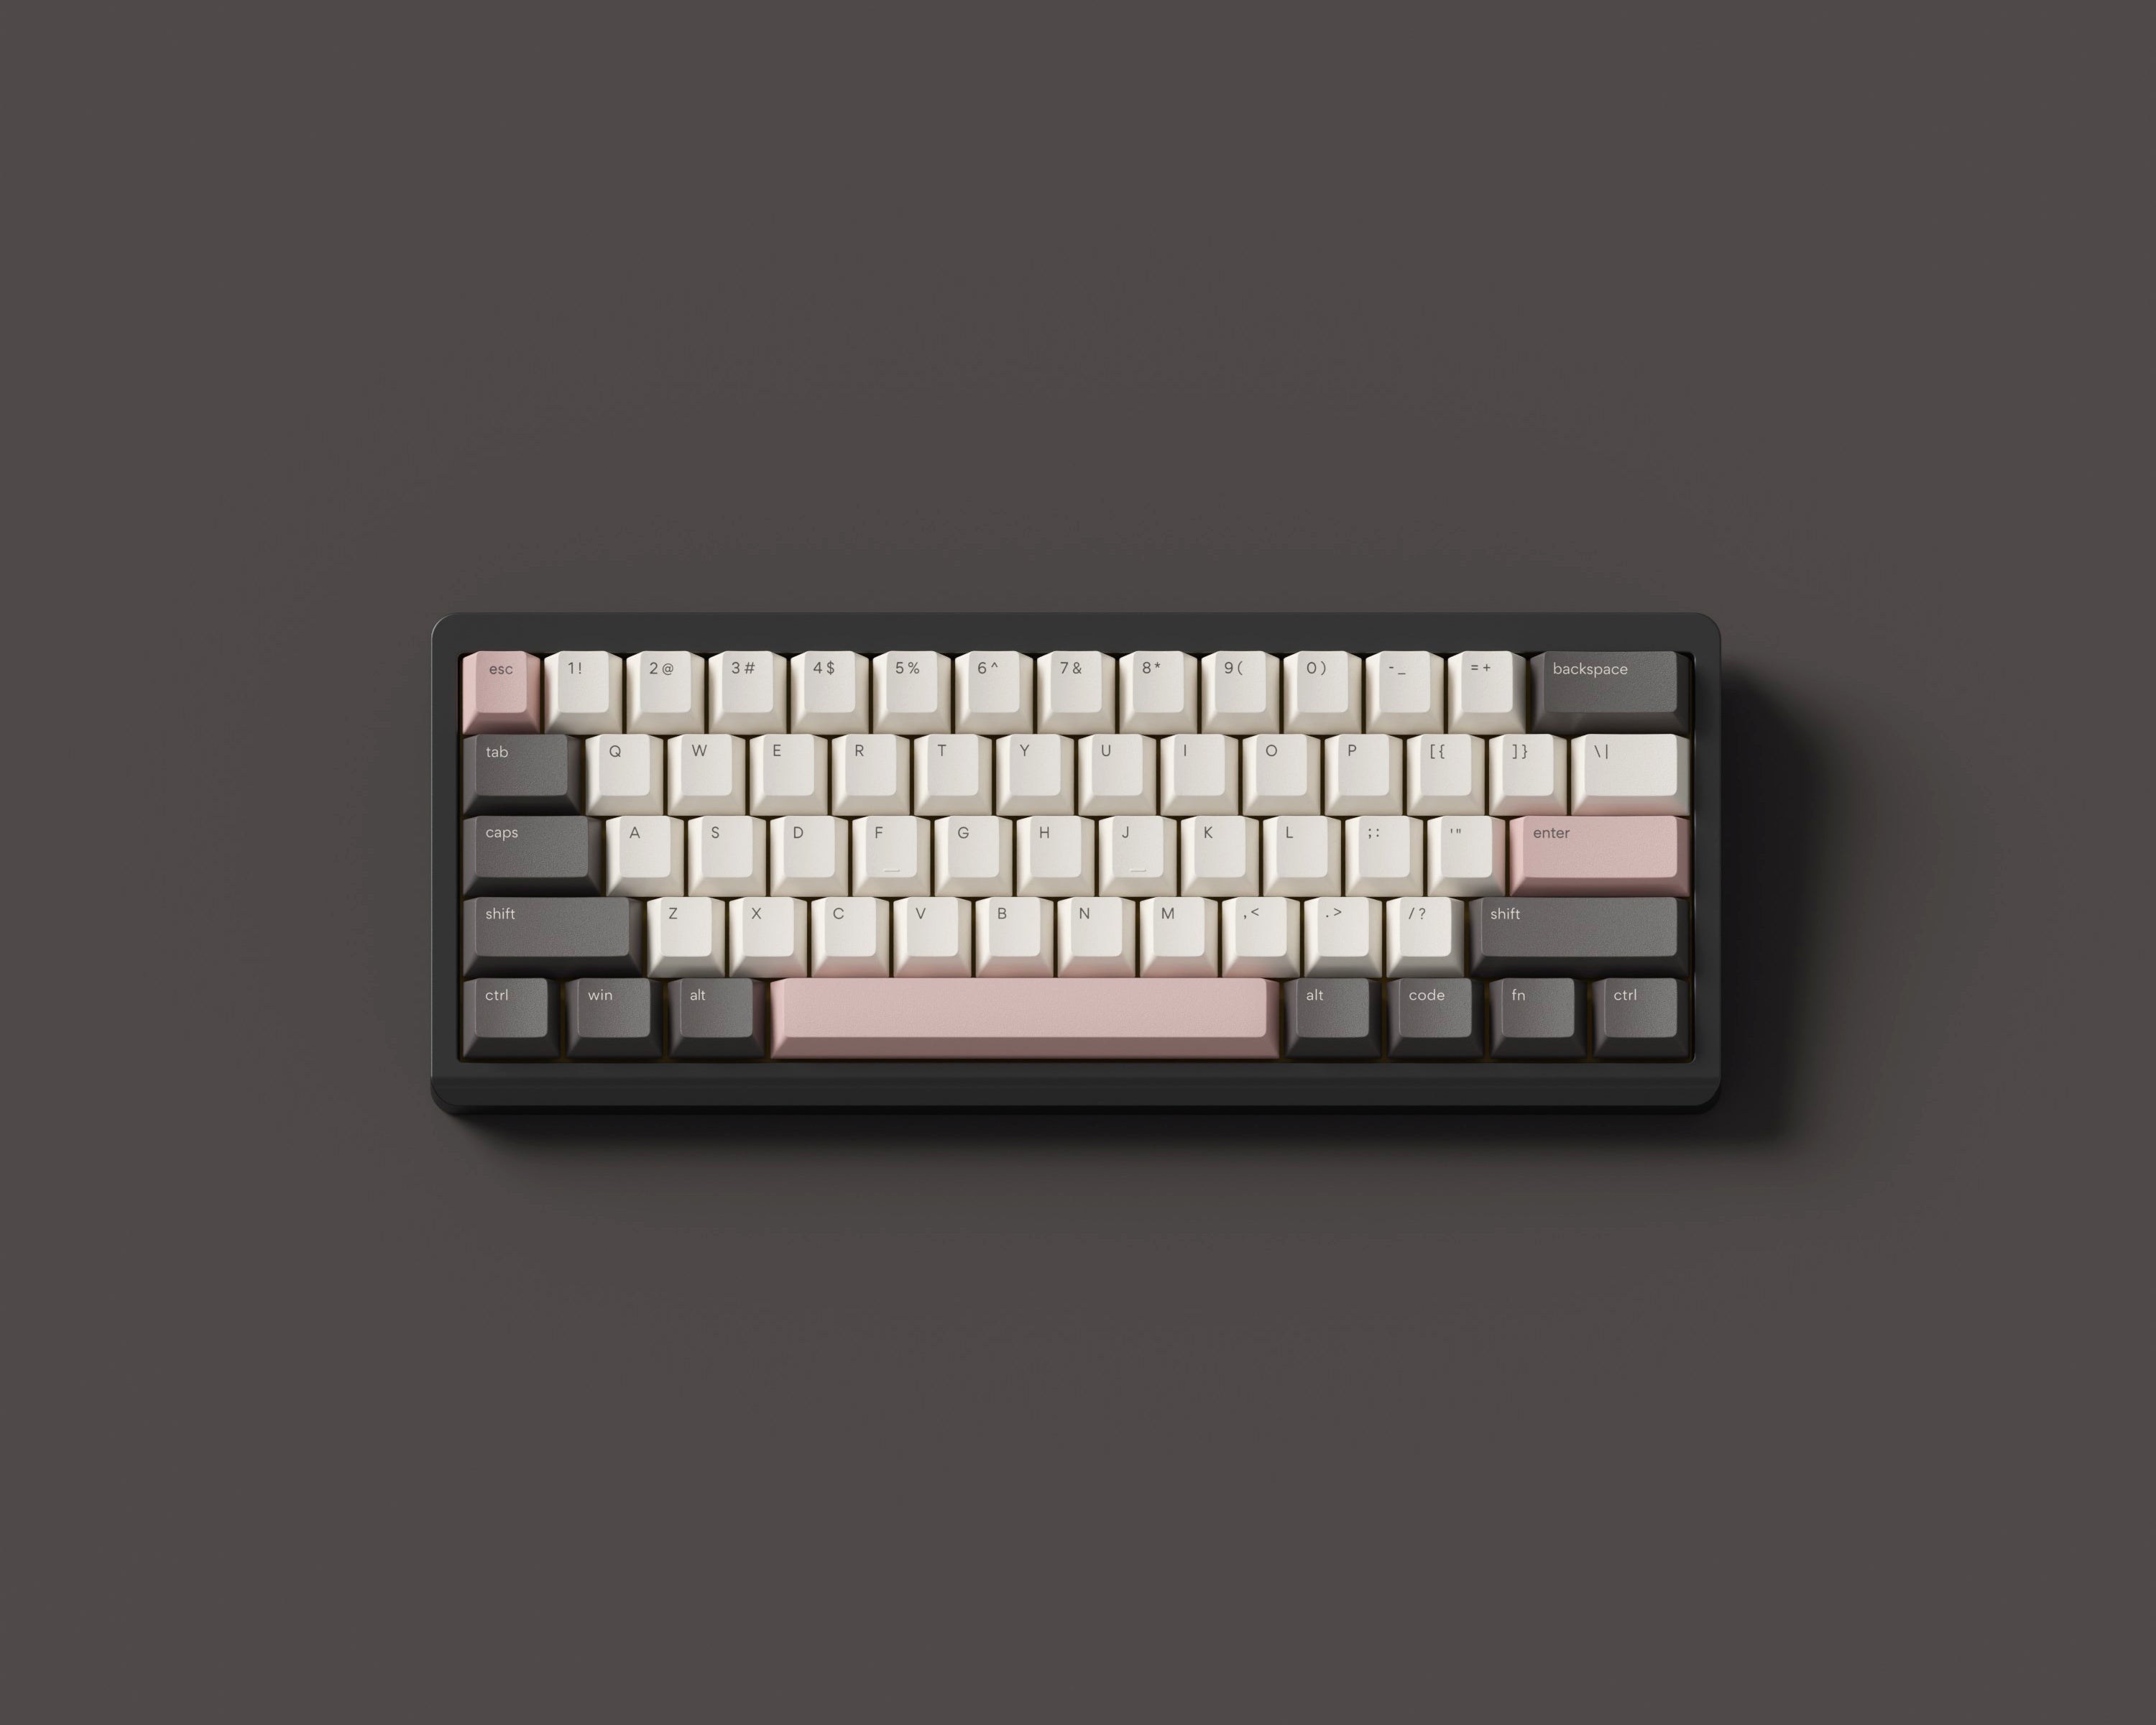 little ghost keycaps – osume